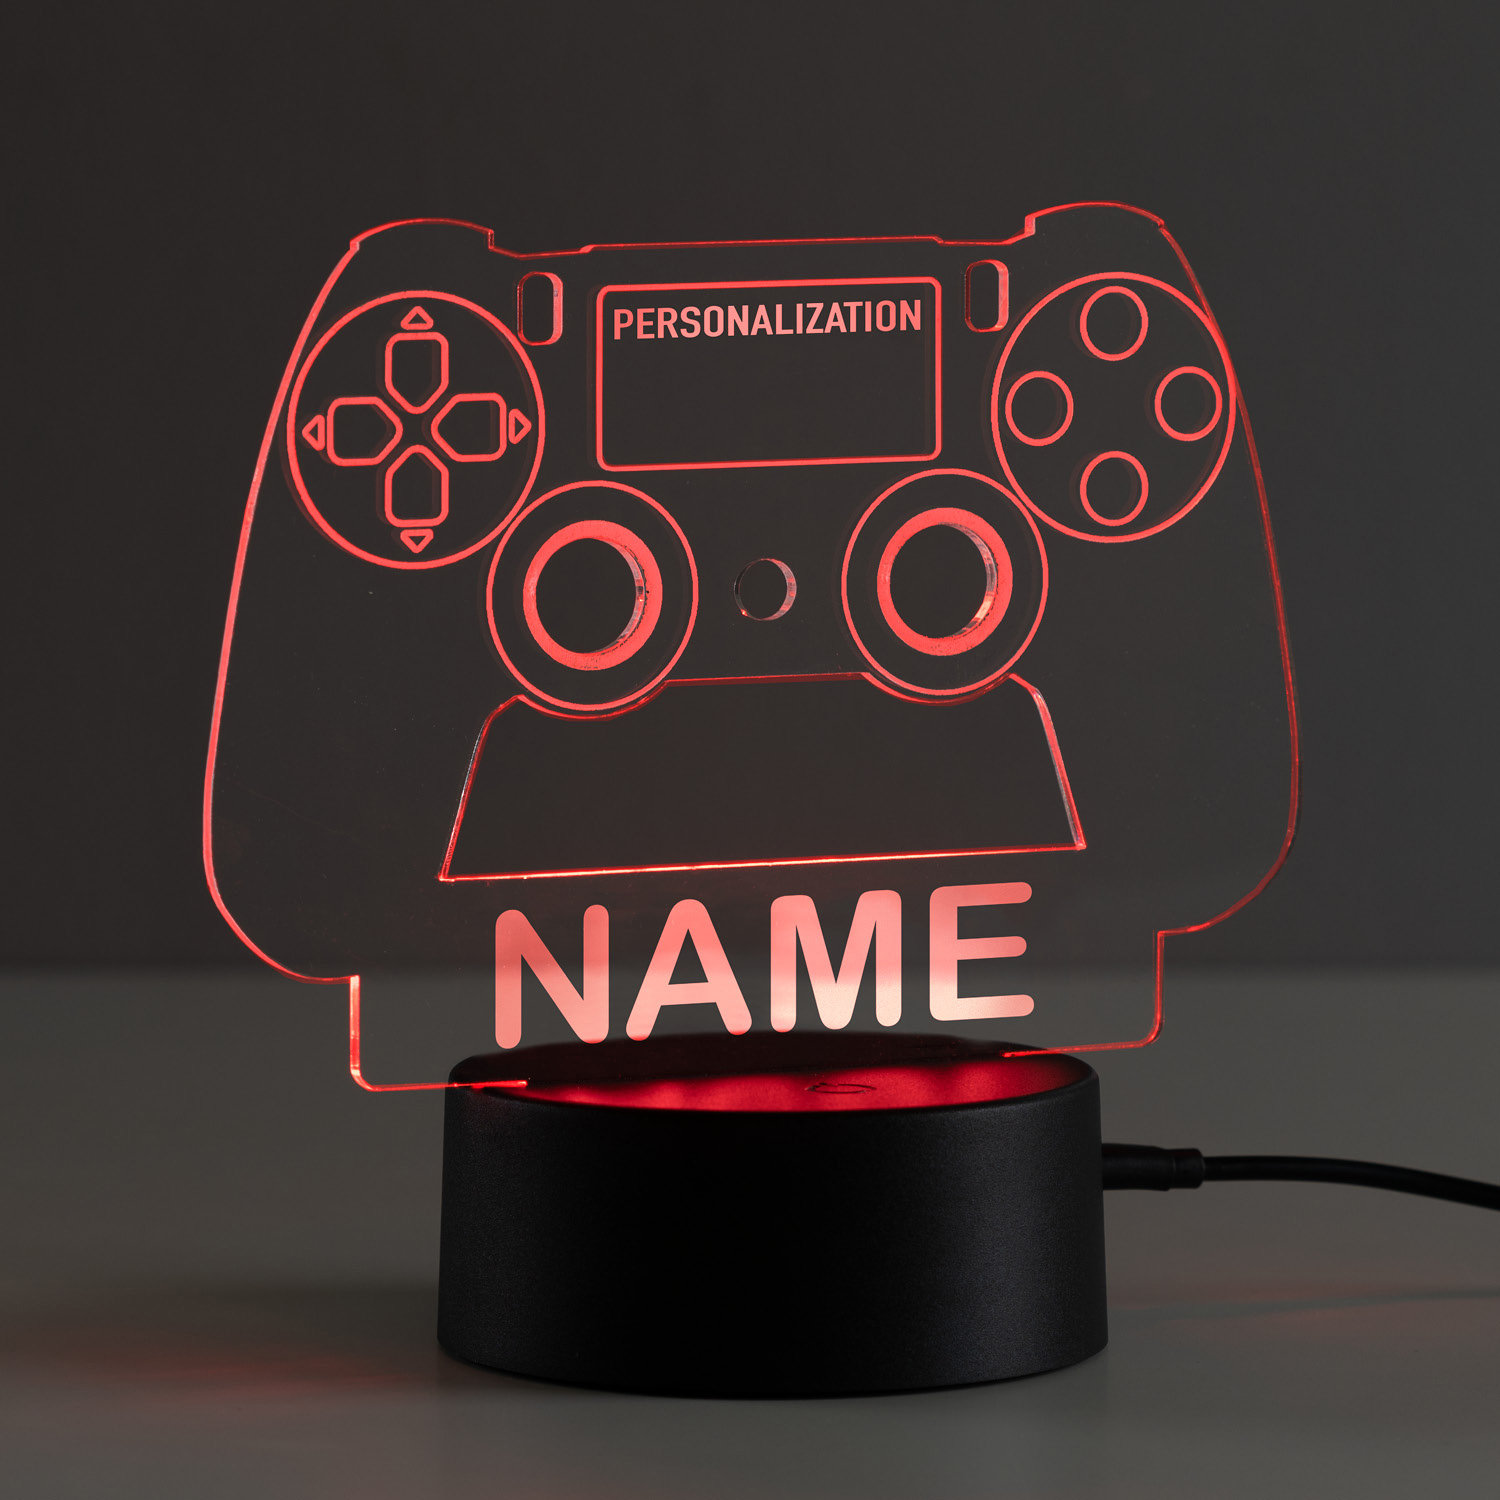 This Laser Makes Customizing Gifts A Breeze! 